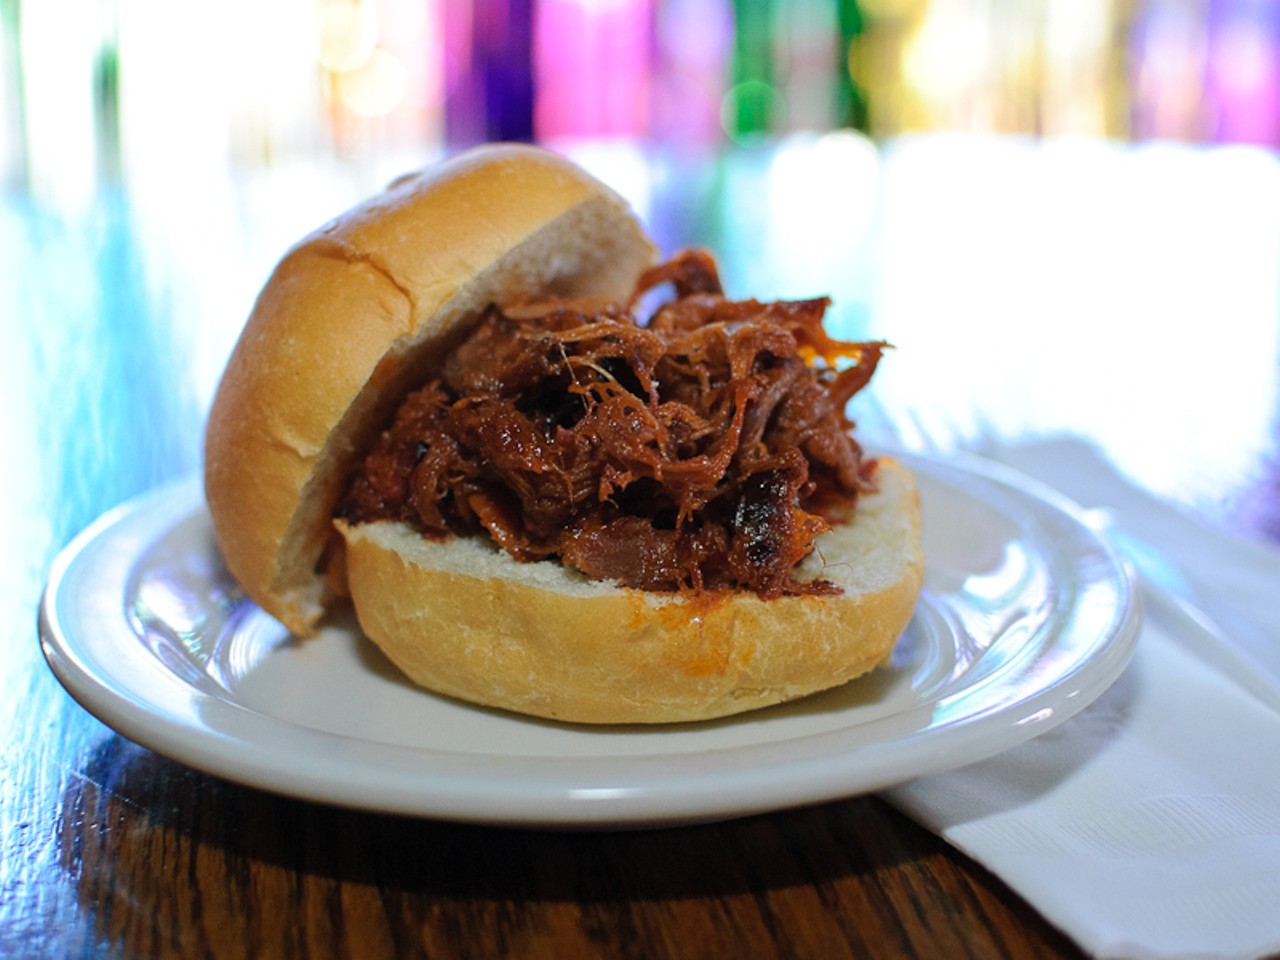 Gladstone's secret recipe for their delicious pulled pork? It's hickory smoked for eleven hours, coated with a special Gladstone's rib rub and hand-pulled.